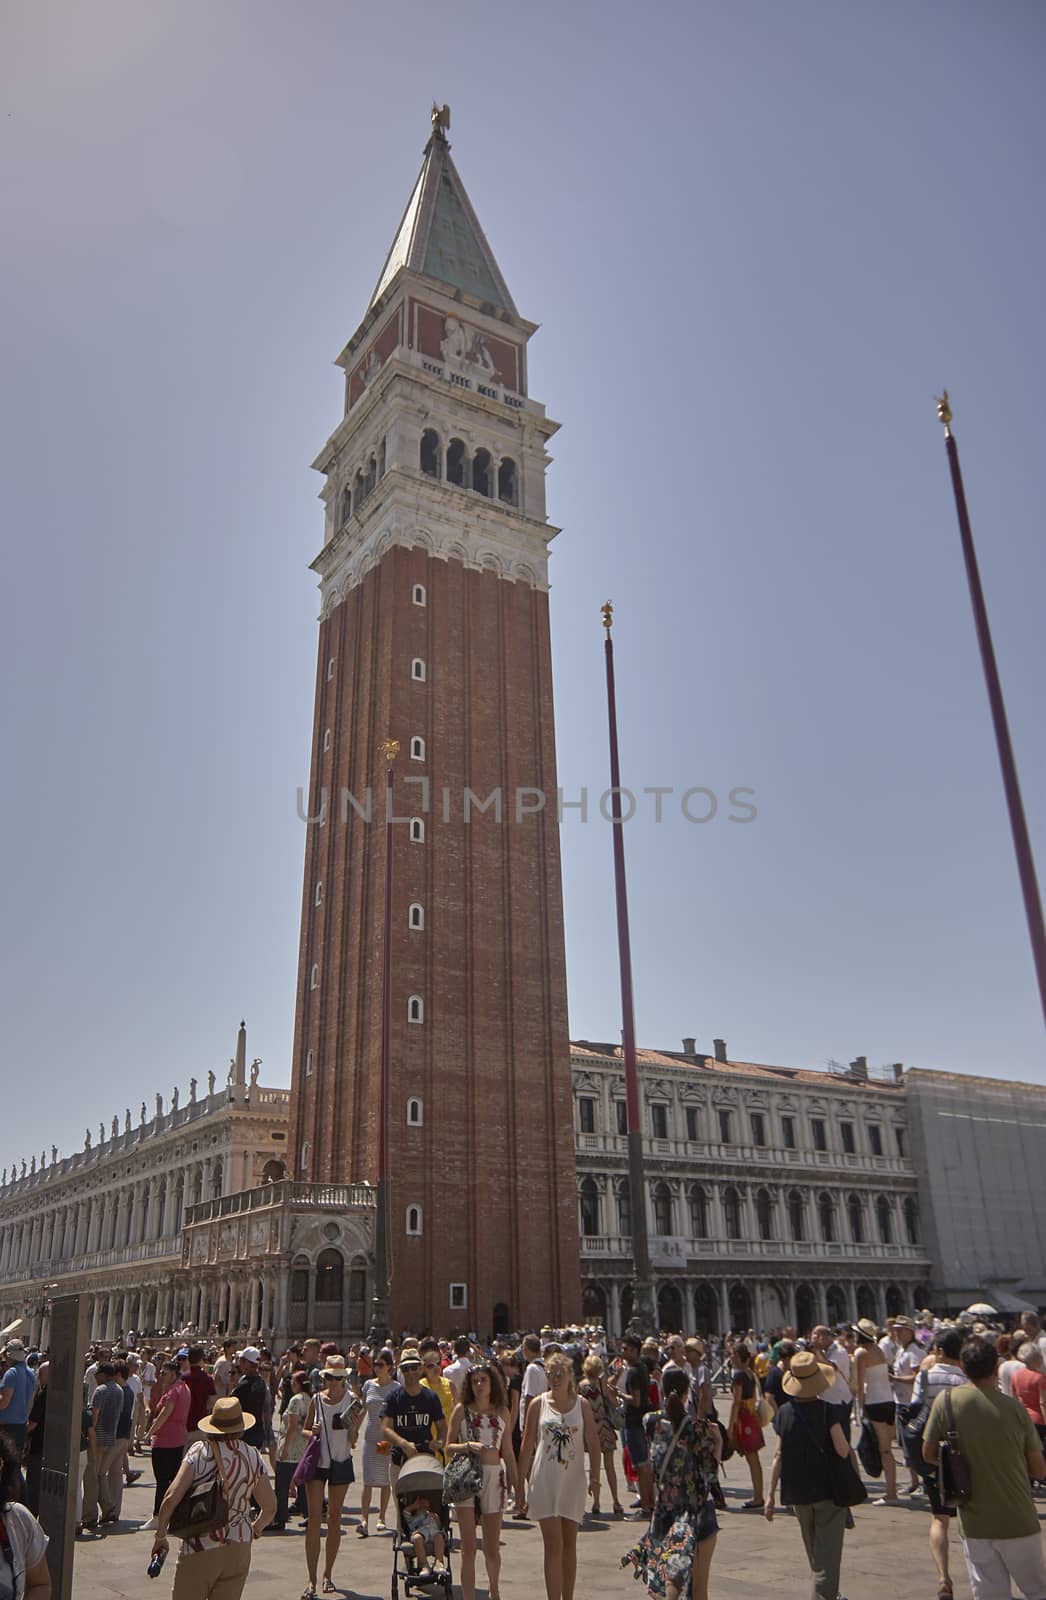 bell tower of St. Mark's Basilica in Venice. by pippocarlot